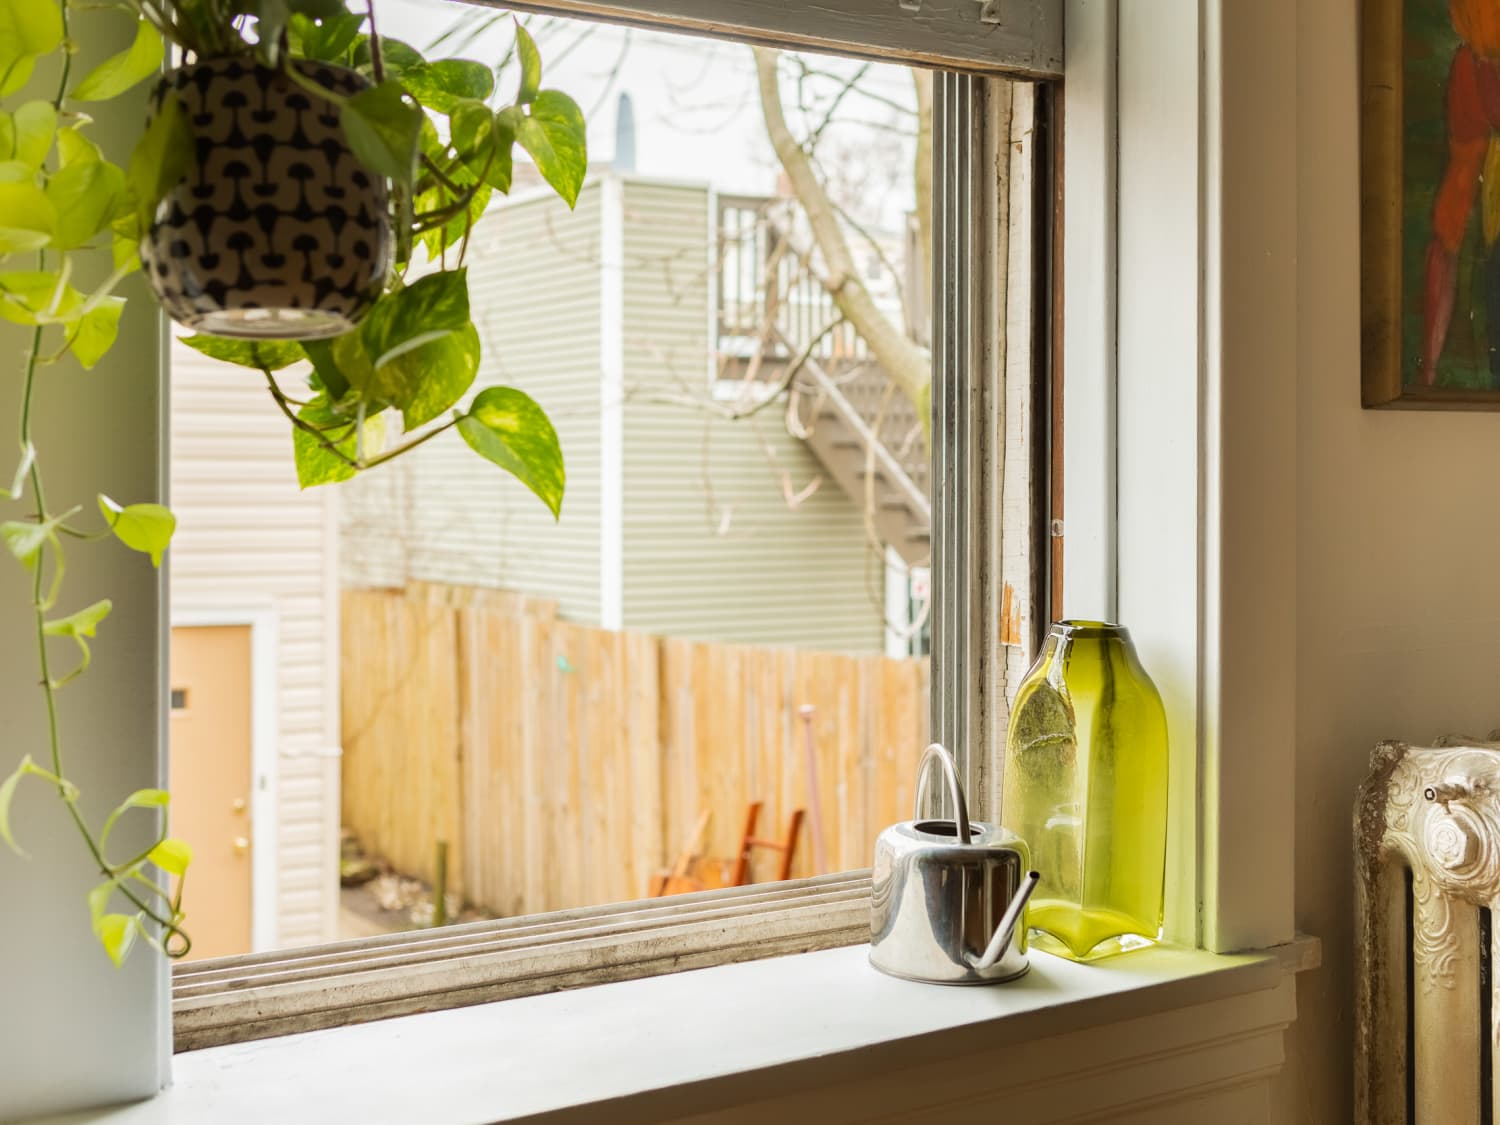 7 Things You Should Never Store on Your Window Sill, According to ...